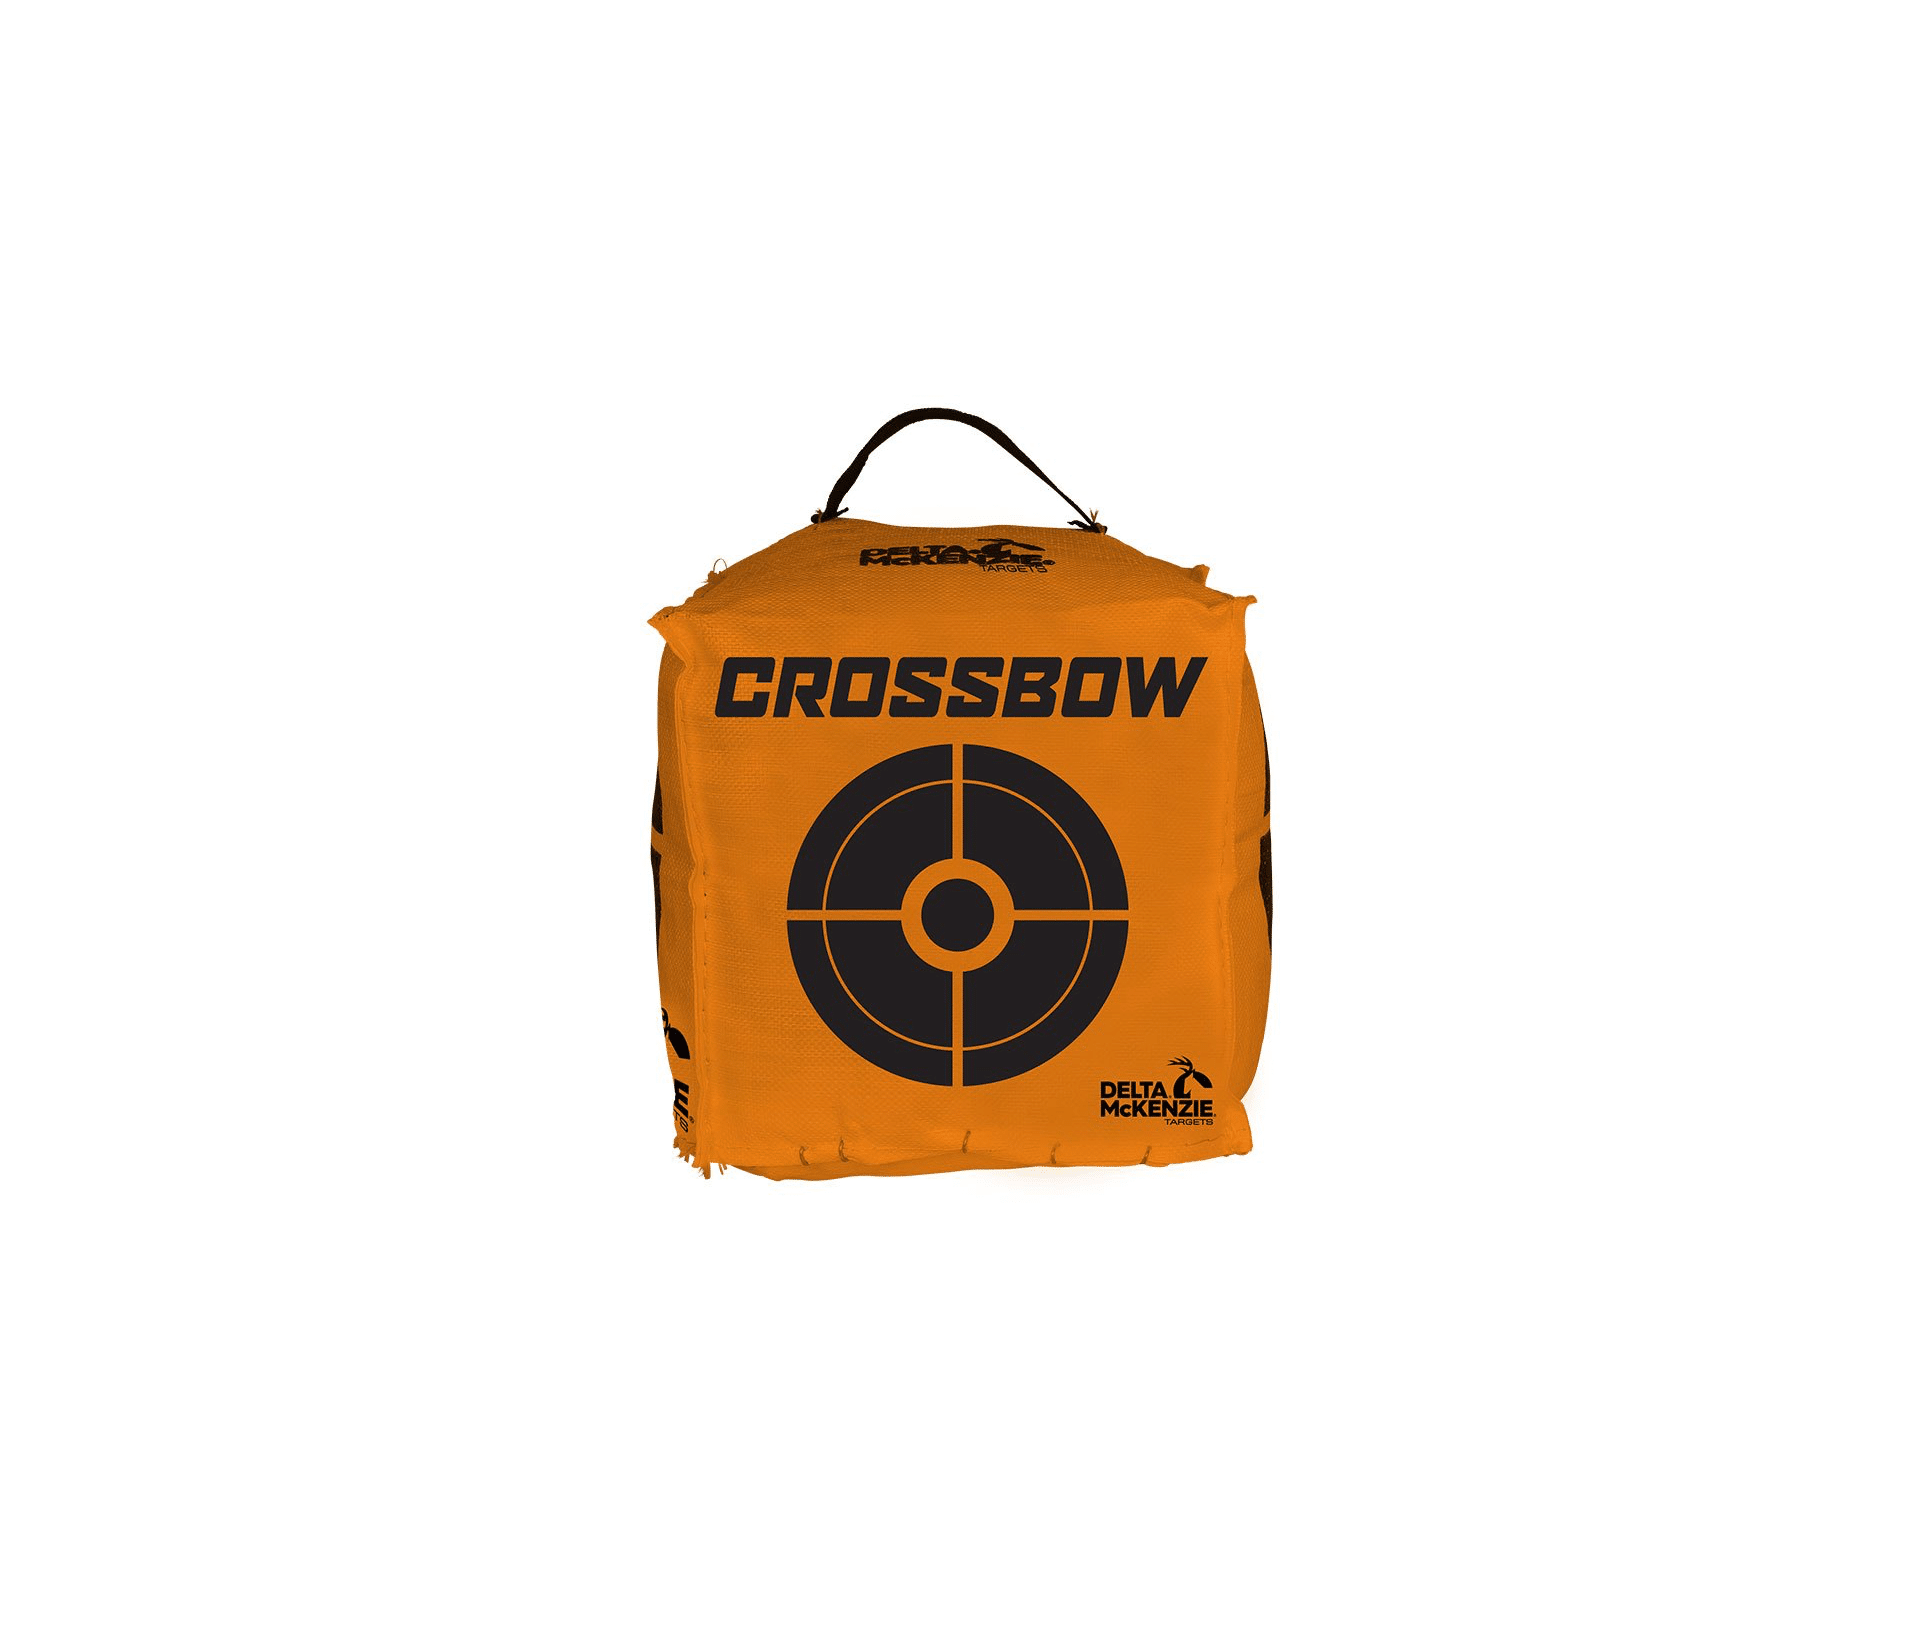 Best Crossbow Target Roundup Review 2020: Archery Edge